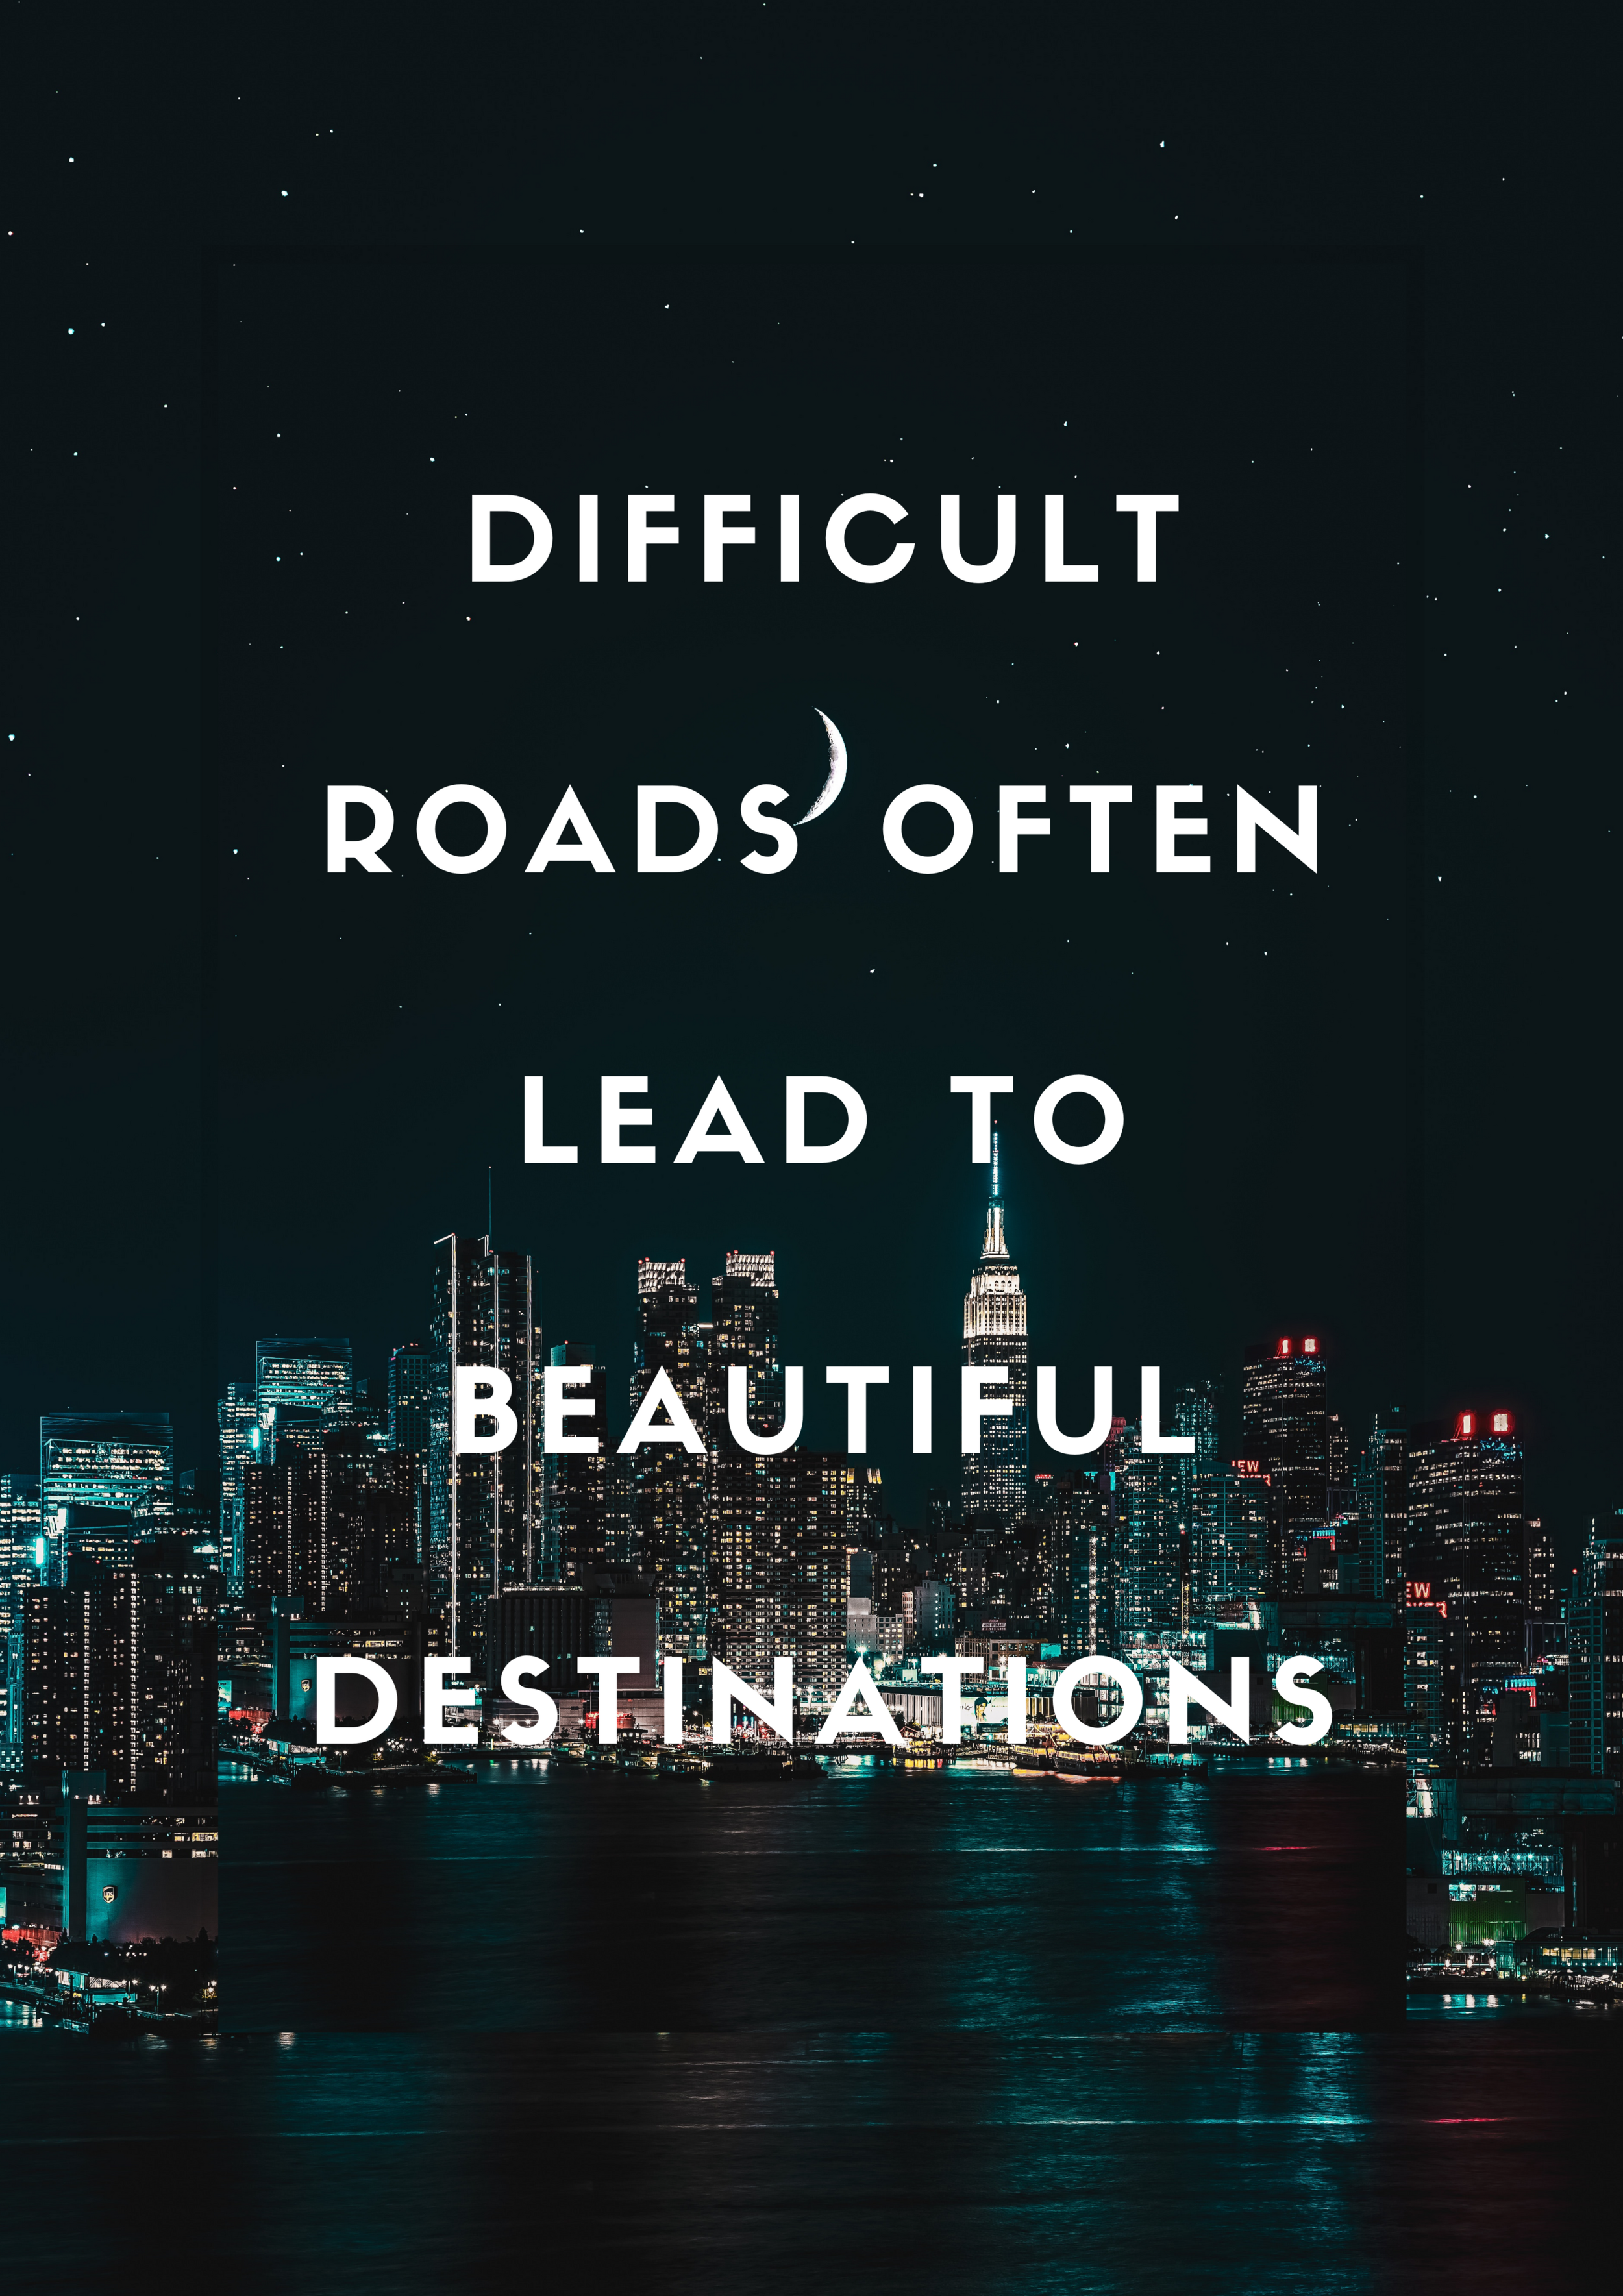 Difficult Roads often Lead to Beautiful Destinations